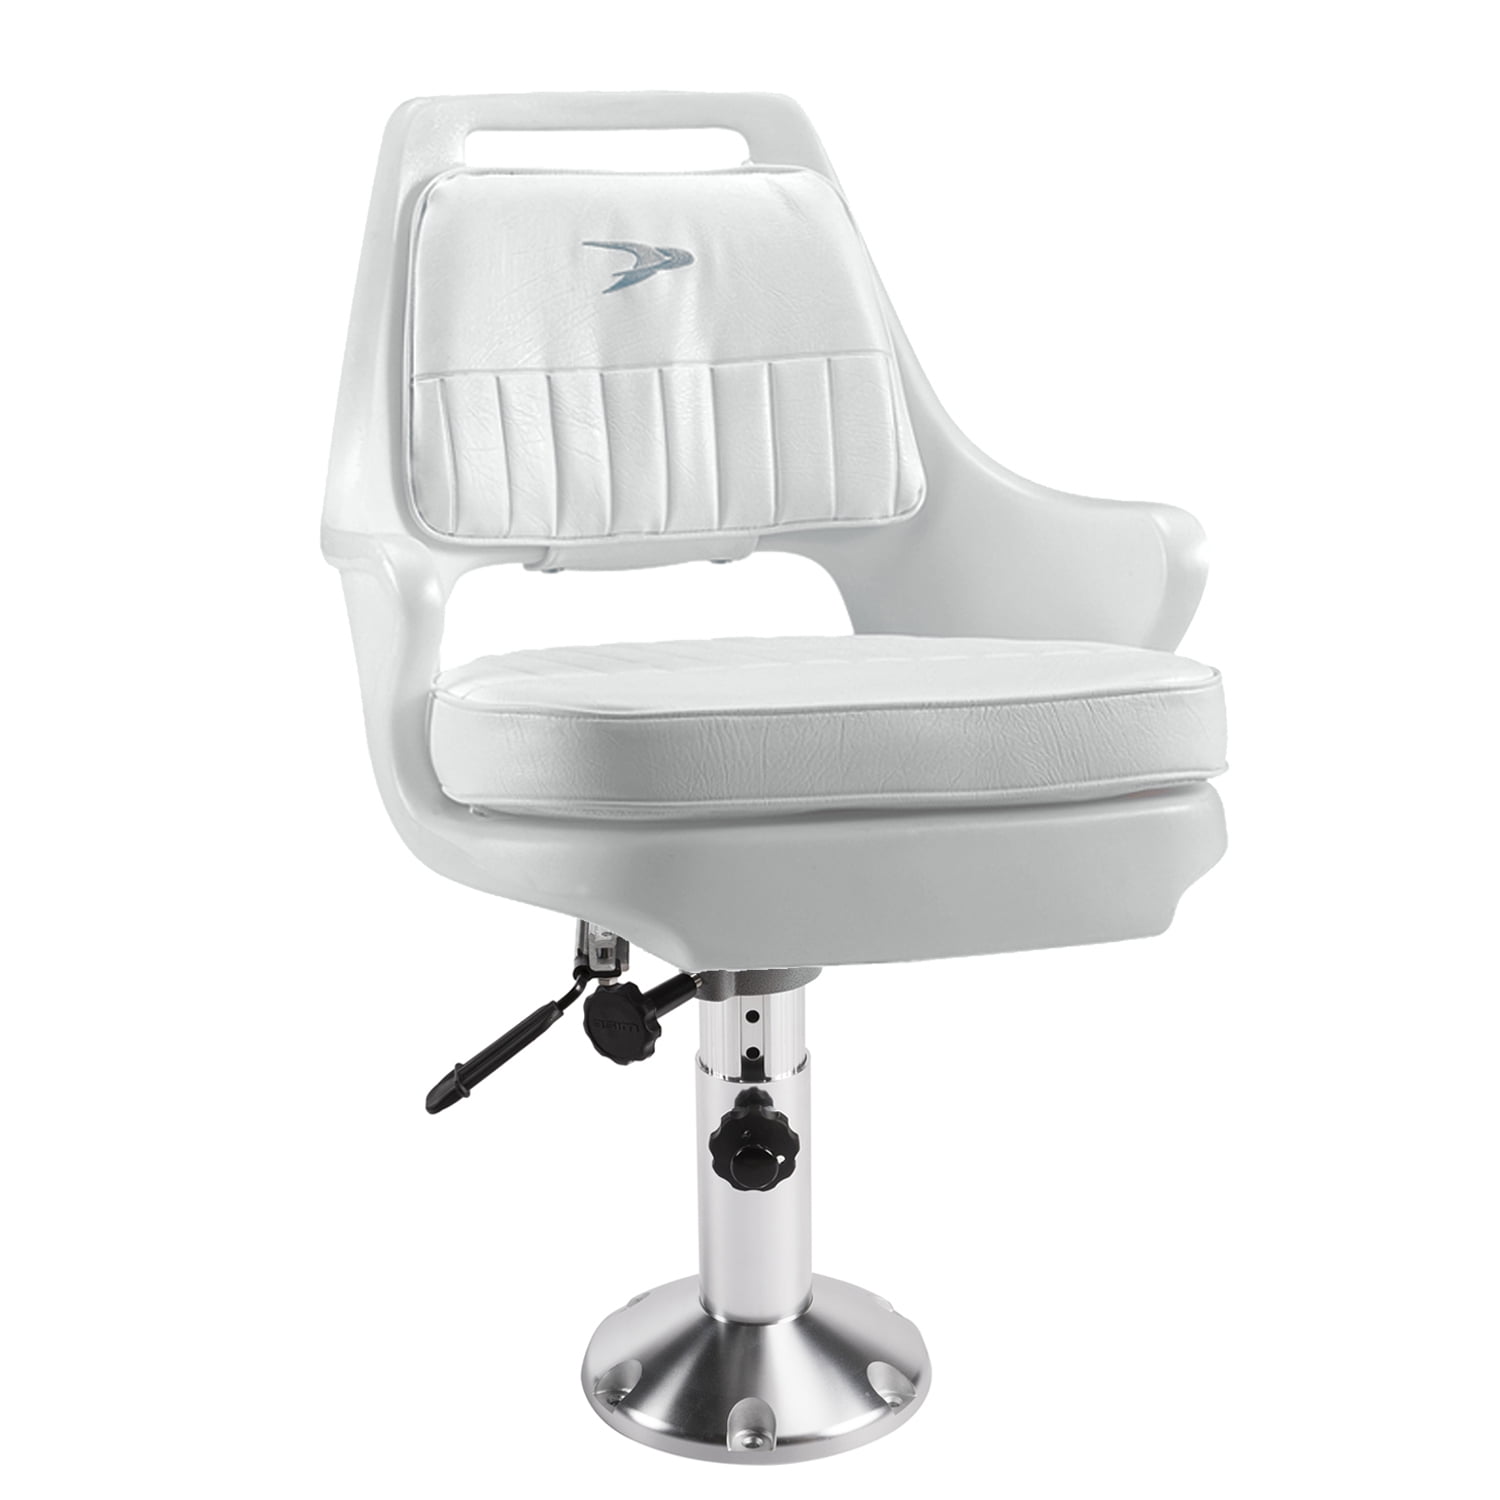 White Wise 8WD013-3-710 Standard Pilot Chair with Cushions and Mounting Plate